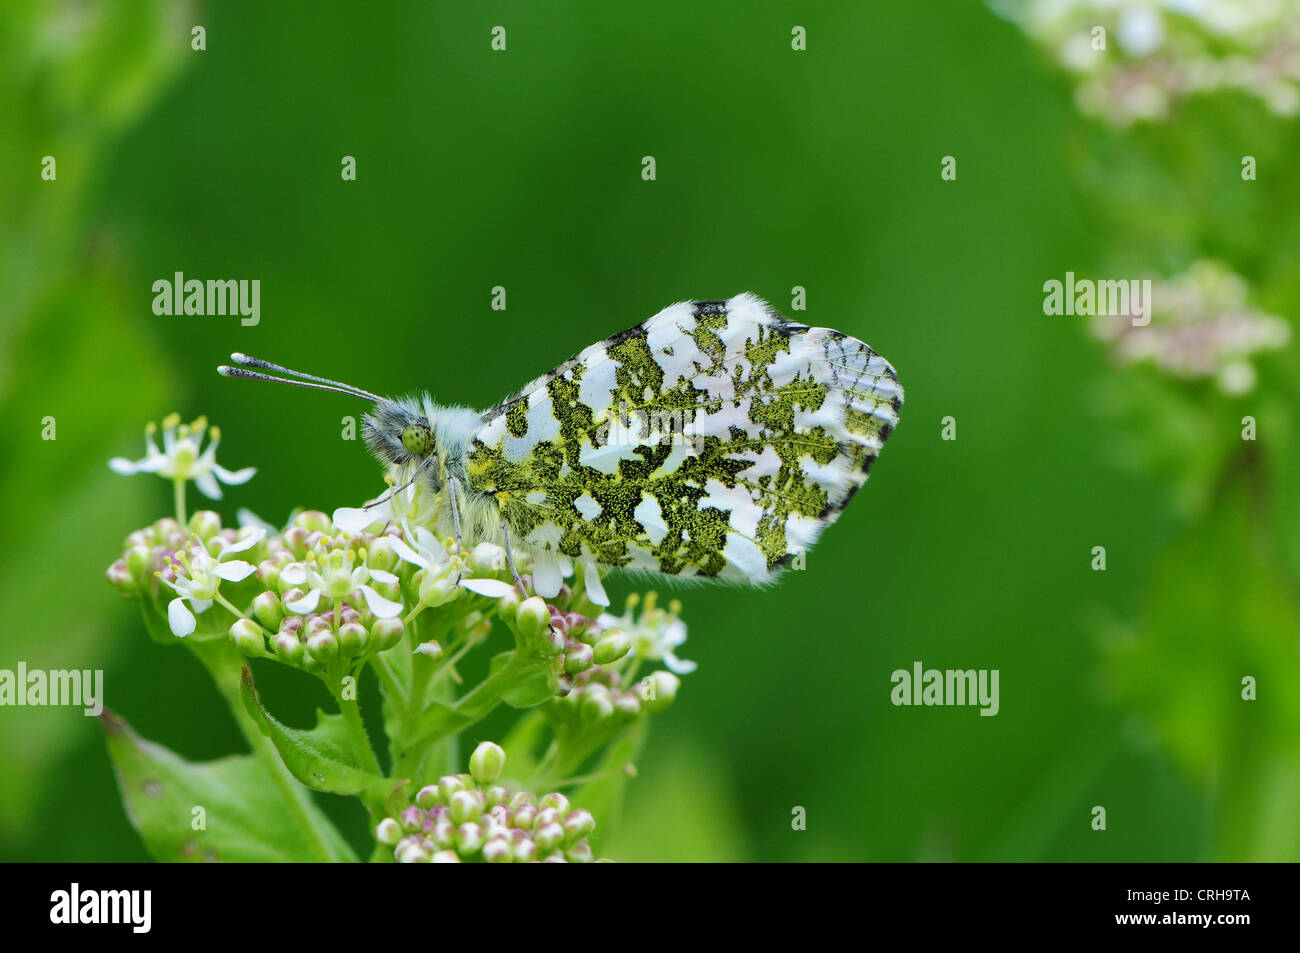 Orange tip butterfly Anthocaris cardamines showing underside of wing on Hoary Cress or Hoary Peppermint Cardaria draba Stock Photo